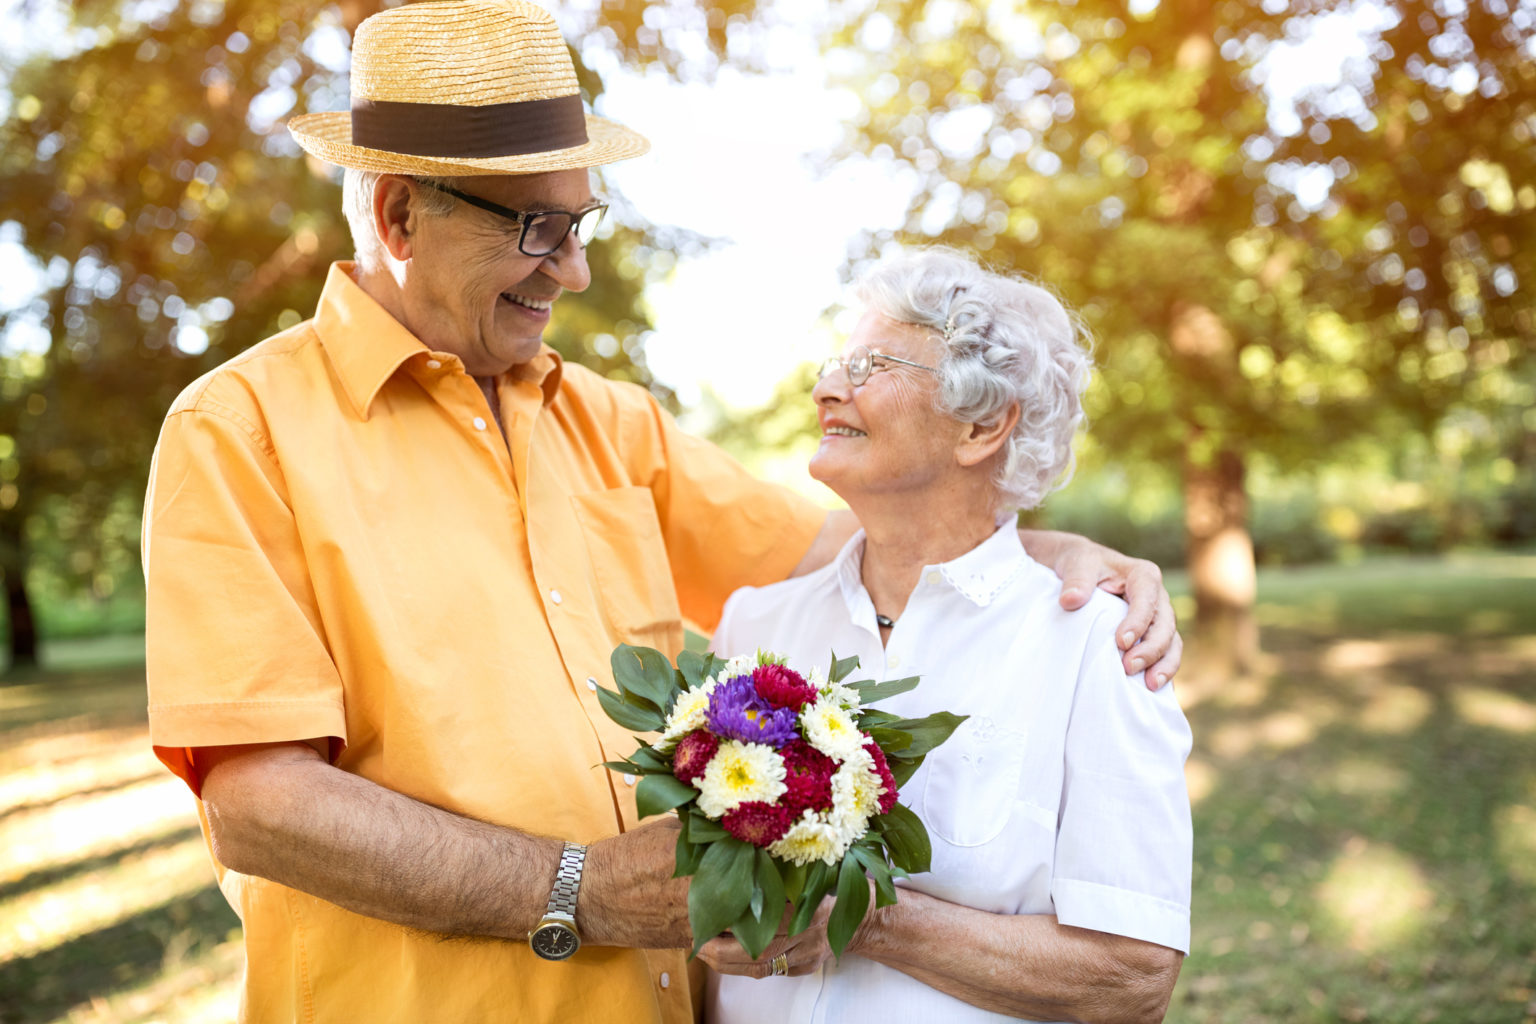 A senior couple looks happily at each other. The woman is holding flowers.